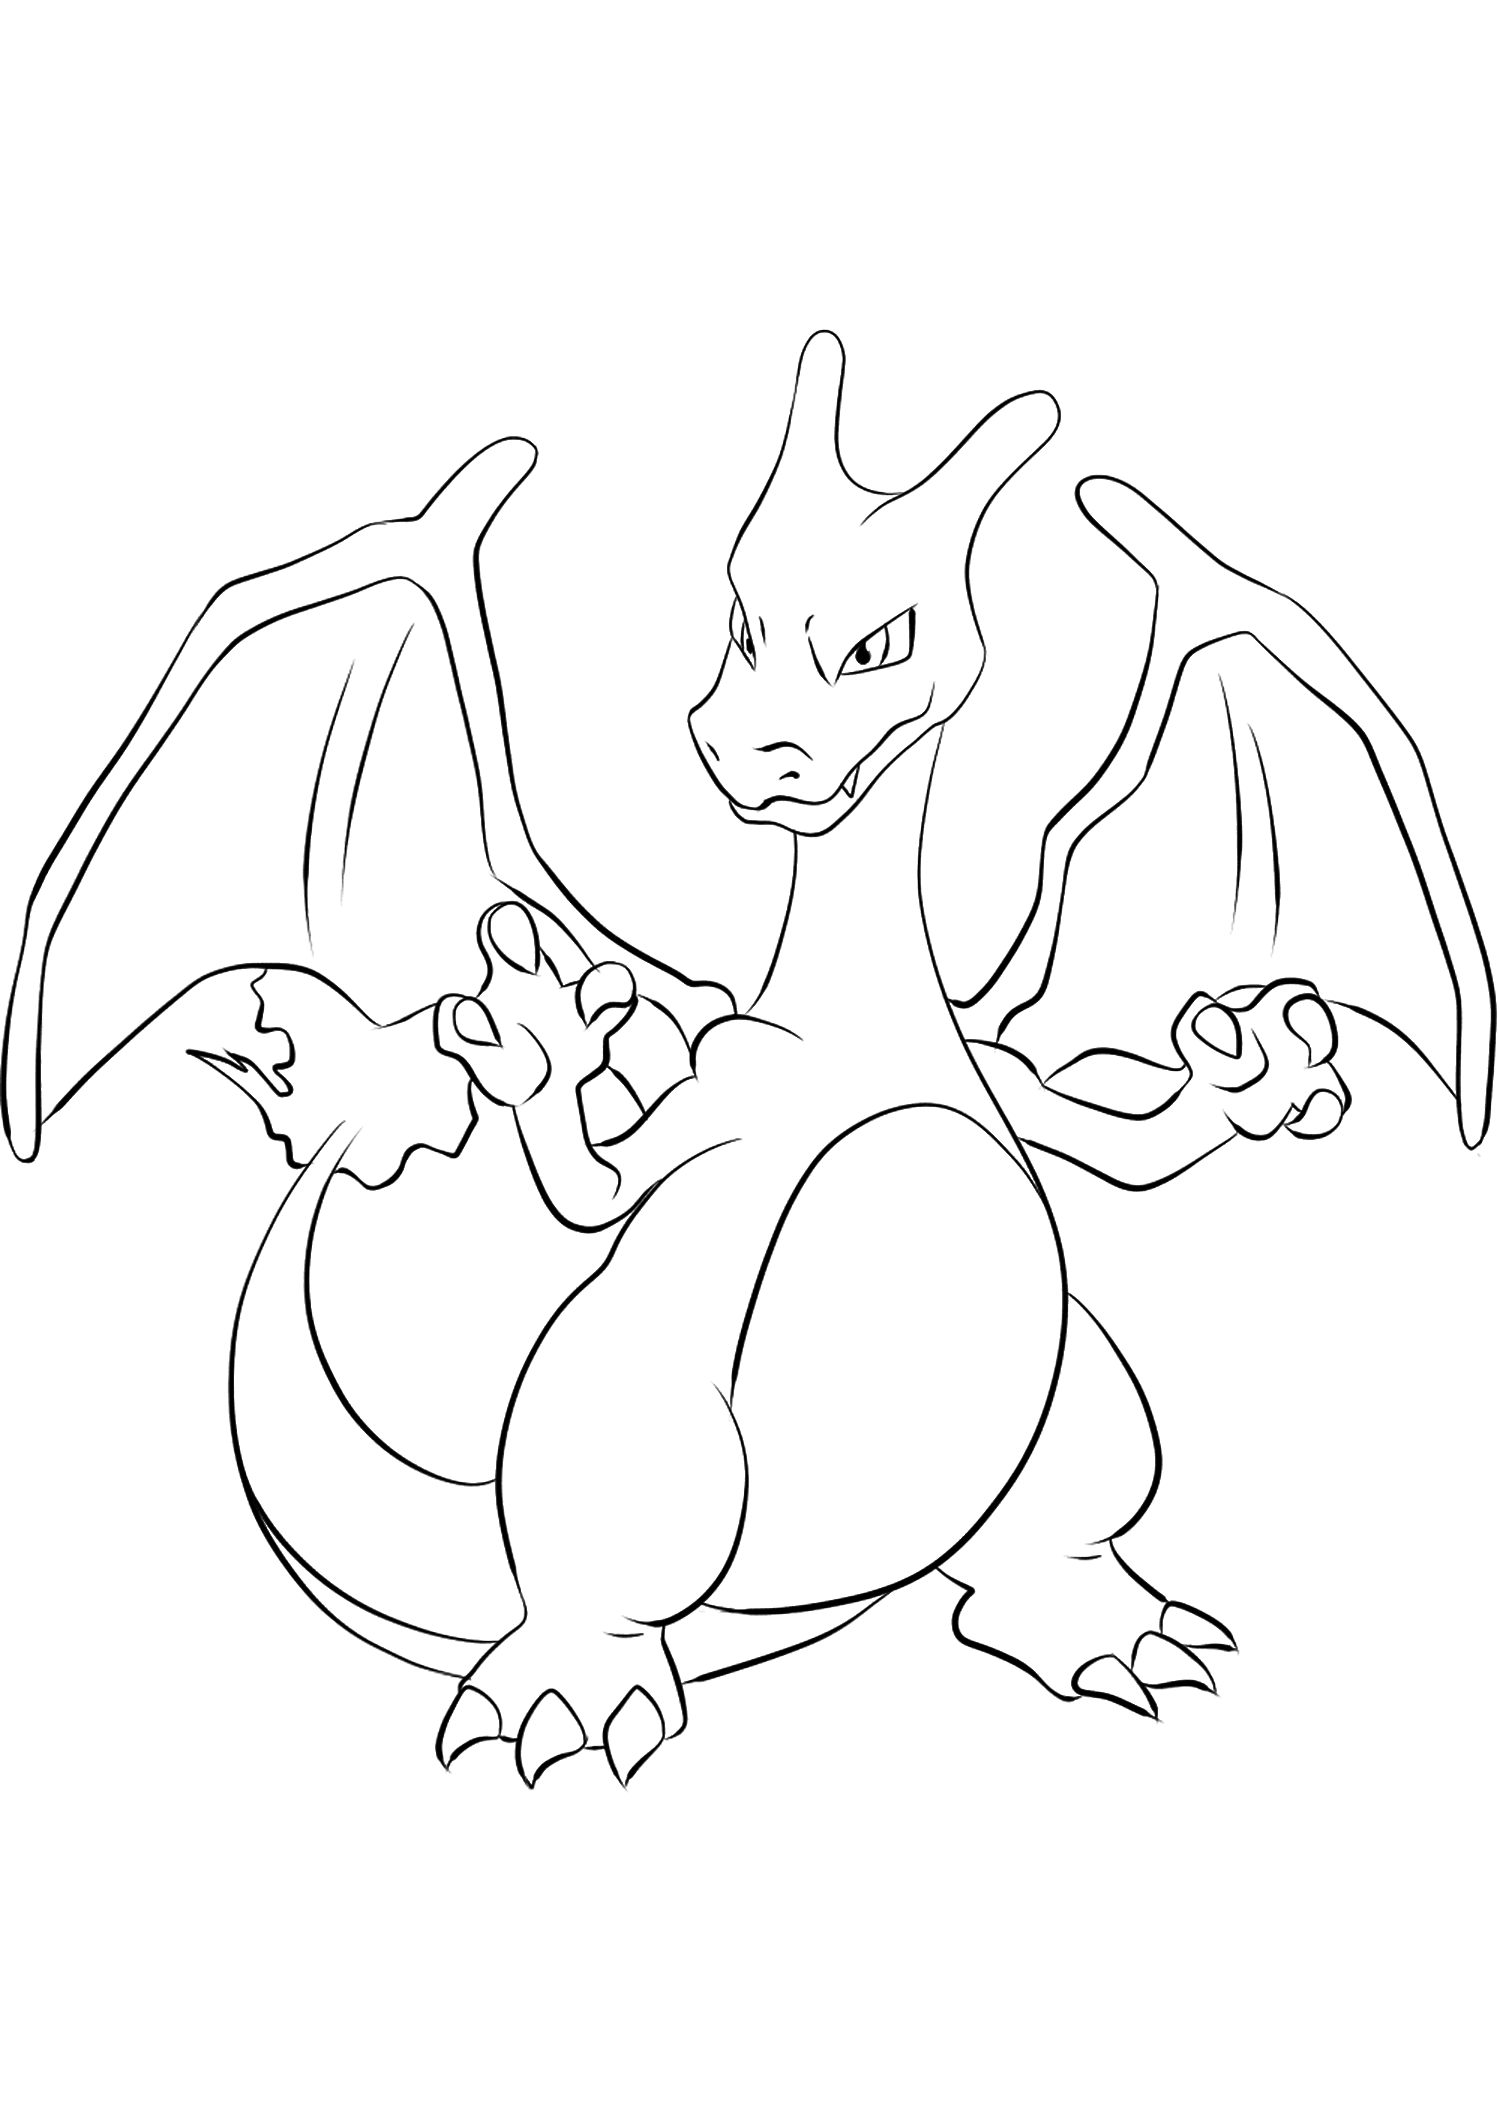 Charizard (No.06)Charizard Coloring page, Generation I Pokemon of type Fire and FlyingOriginal image credit: Pokemon linearts by Lilly Gerbil'font-size:smaller;color:gray'>Permission: All rights reserved © Pokemon company and Ken Sugimori.